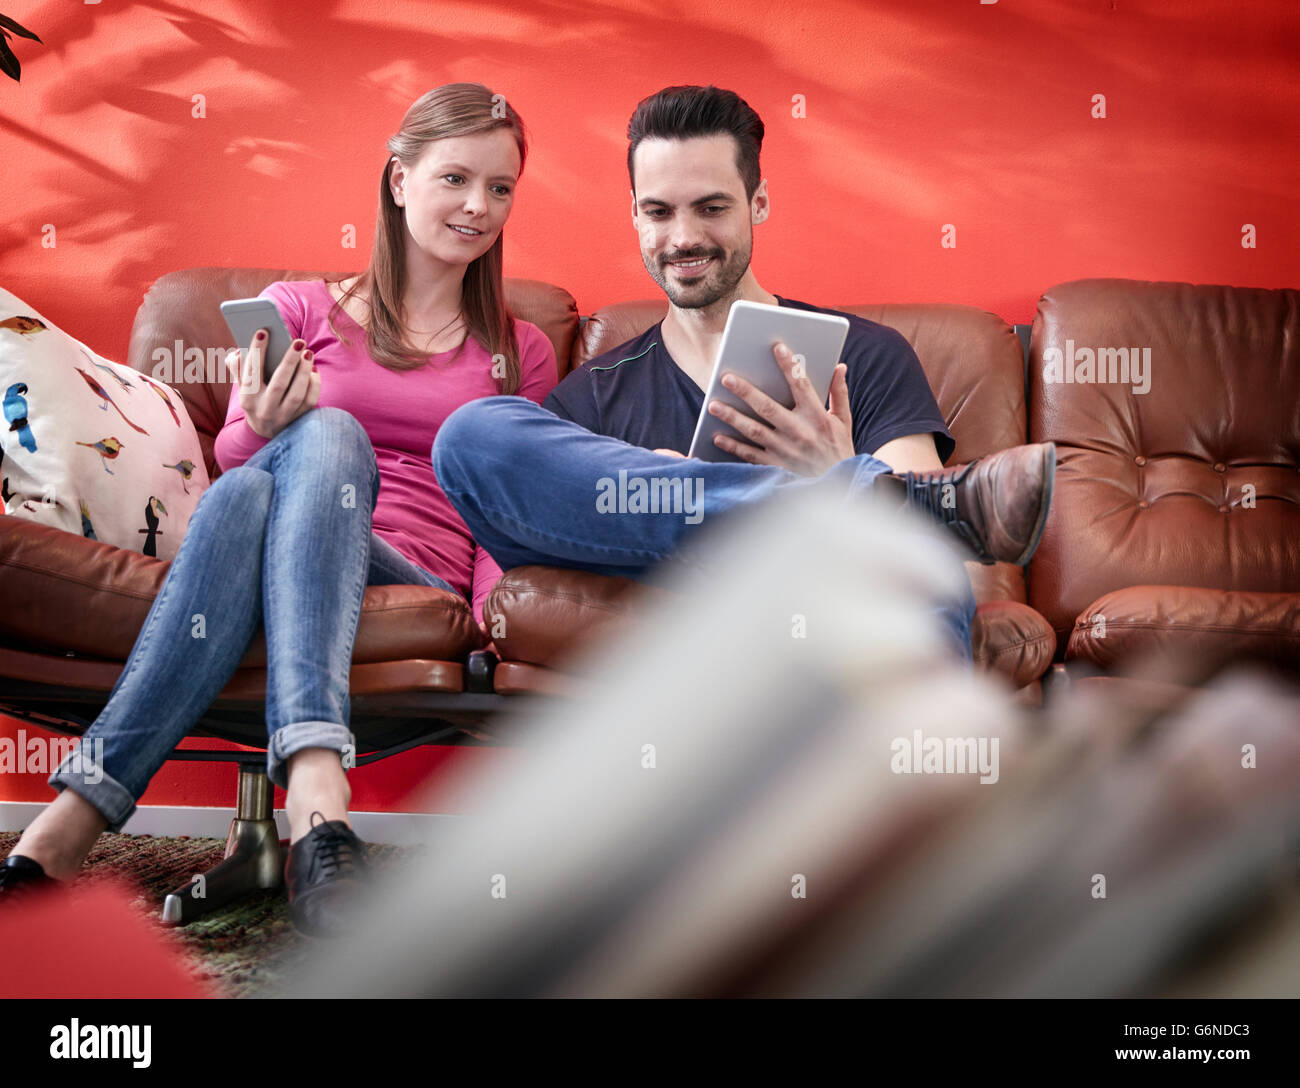 Young businessman and woman sitting on vintage couch using digital gadgets Stock Photo